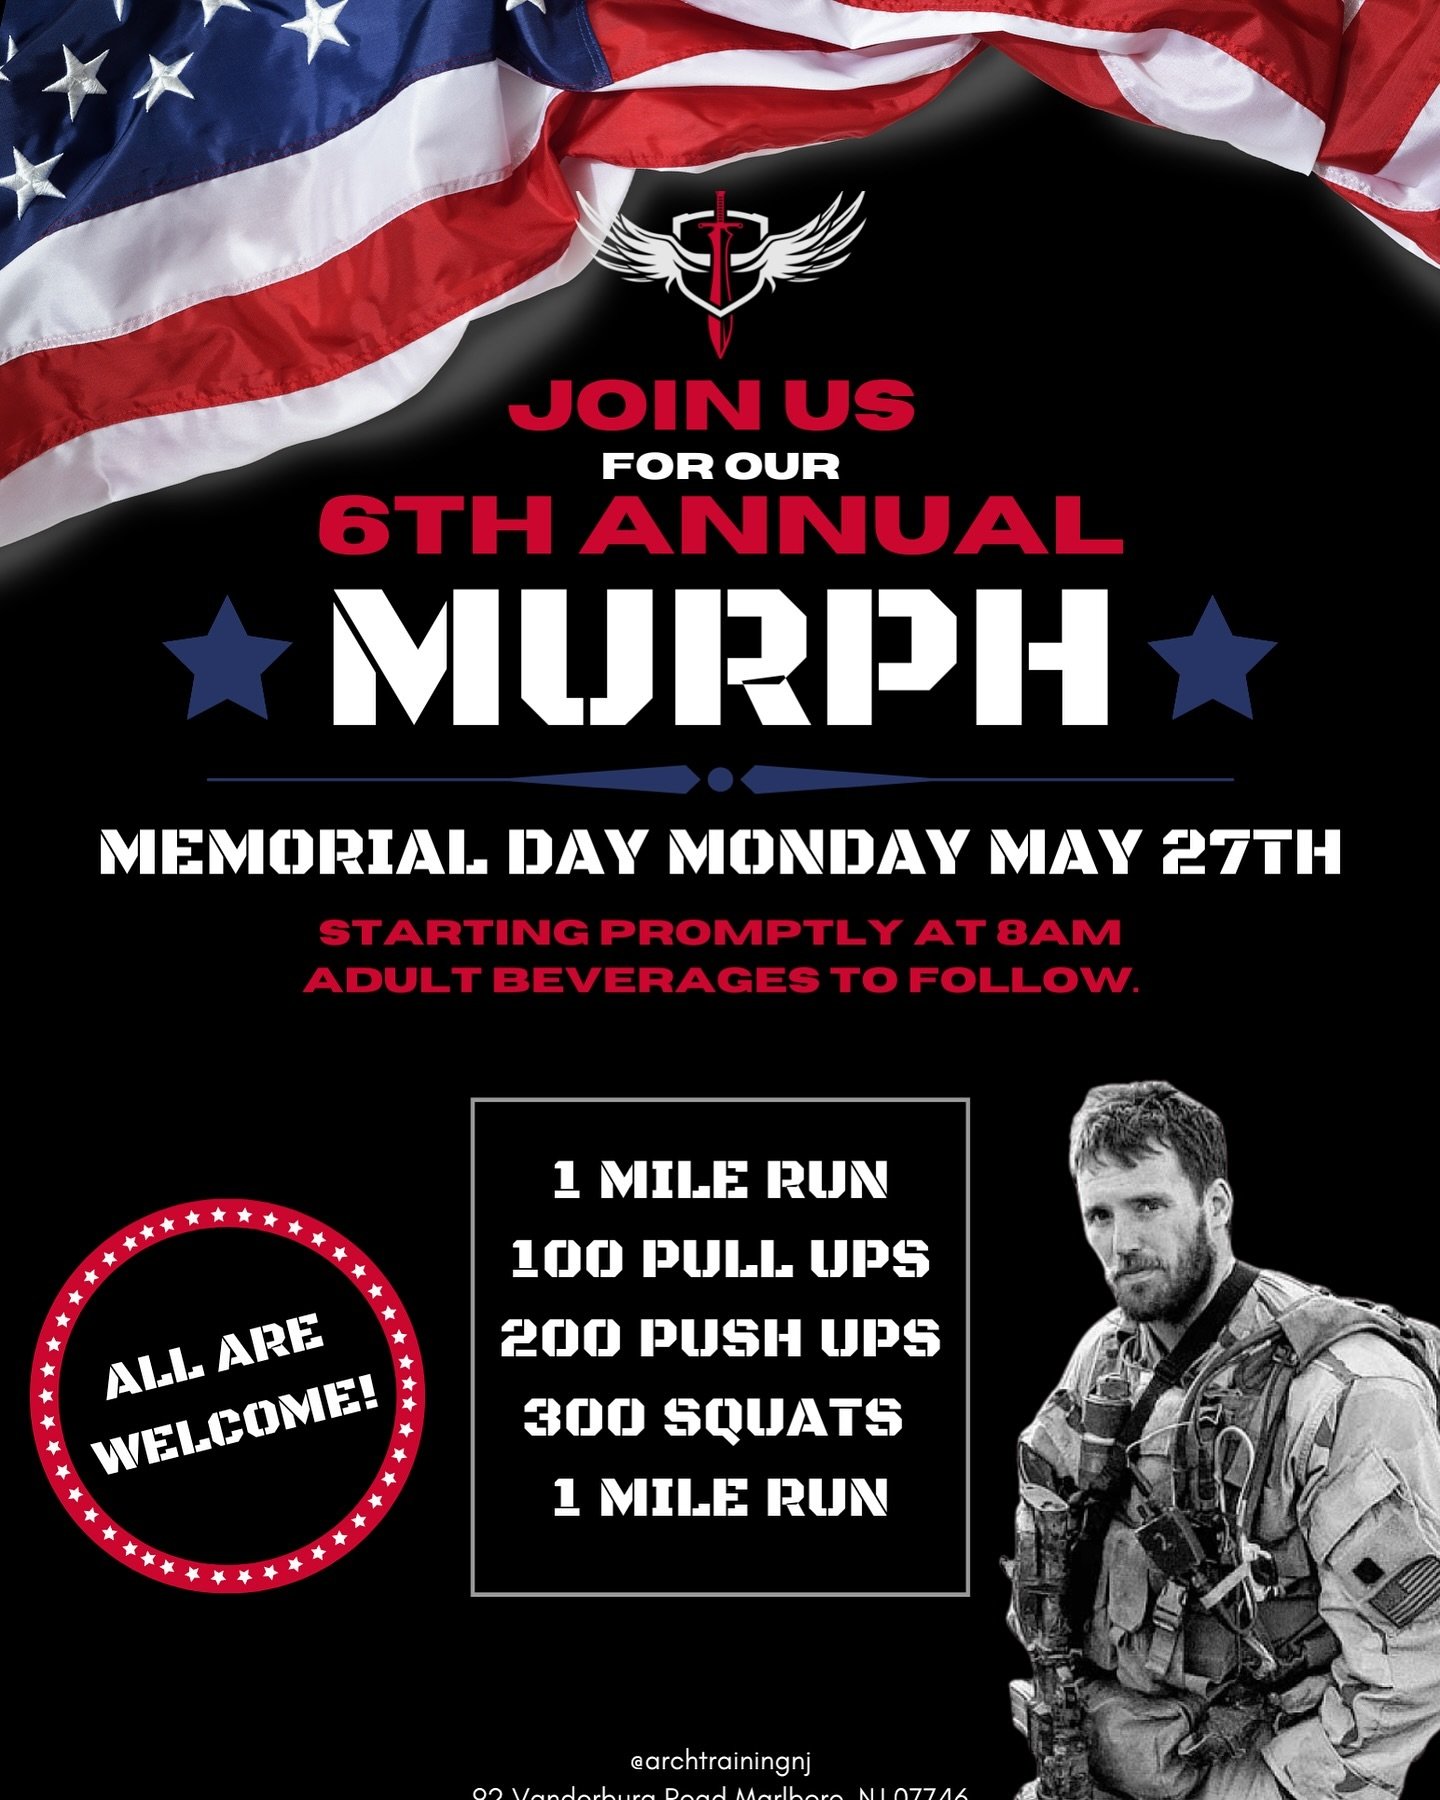 🇺🇸Join us on Memorial Day Monday May 27th at 8AM for our 6th Annual MURPH! 👊

▪️What is the MURPH?
&bull;This hero WOD &ldquo;Murph&rdquo; honors the life of Lieutenant Michael Murphy from Patchogue, NY, who died serving in Afghanistan in 2005.
▪️